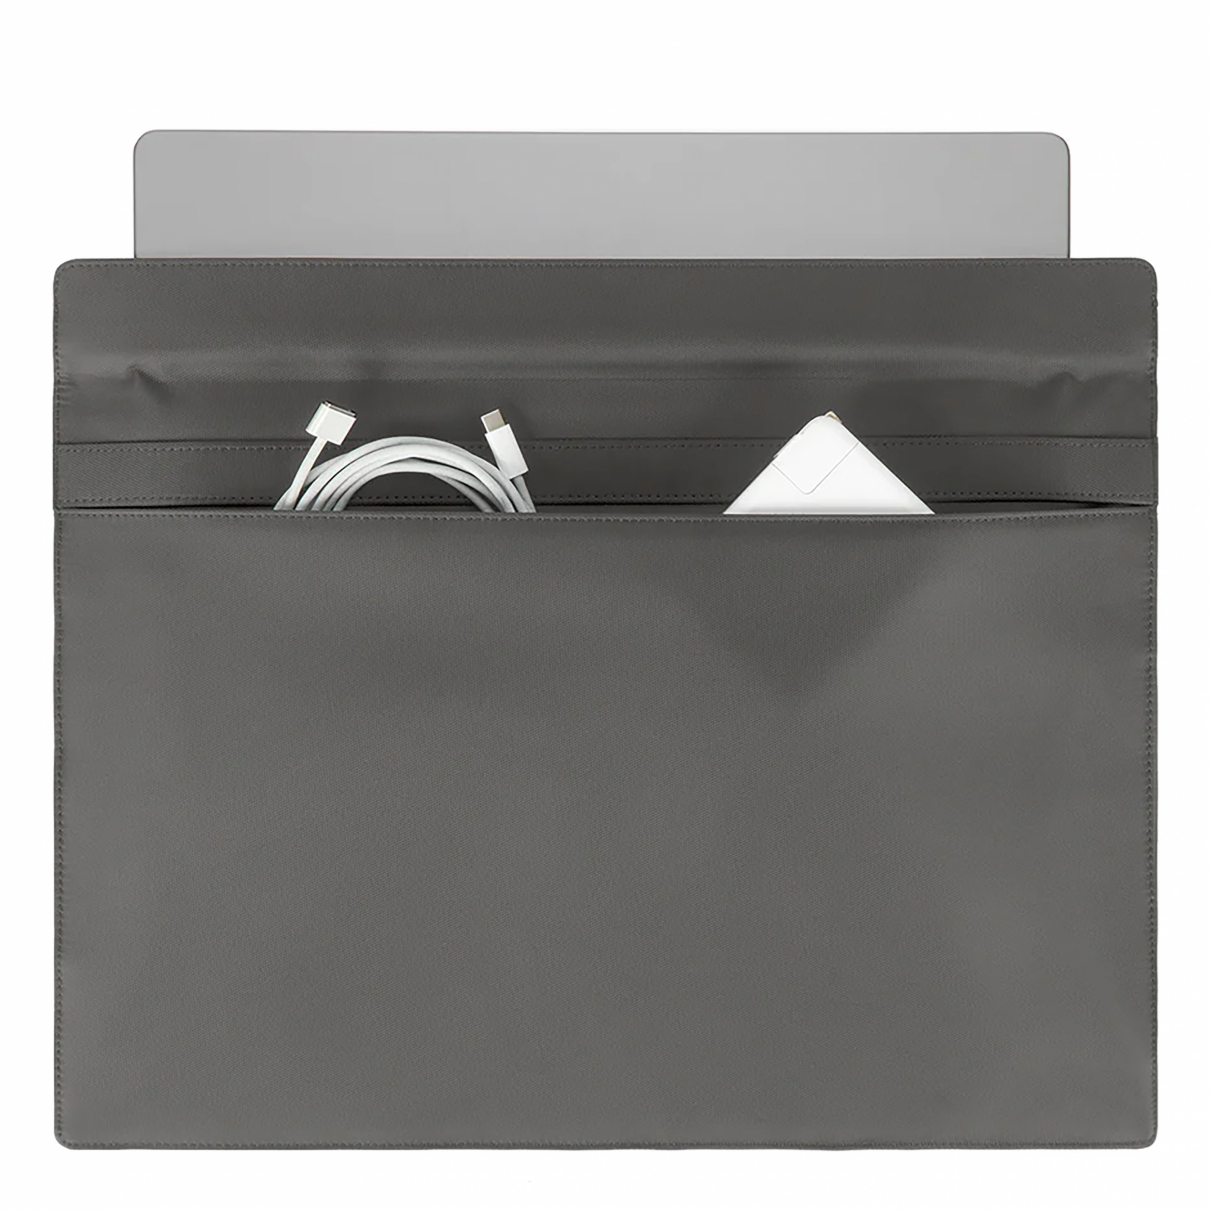 MBG Anti-theft signal blocking laptop case 15/16 inch gray 435 x 315 mm in the group All products / Anti-Theft RFID protection / Anti-theft signal blocking laptop case at MBG Sweden (7009)